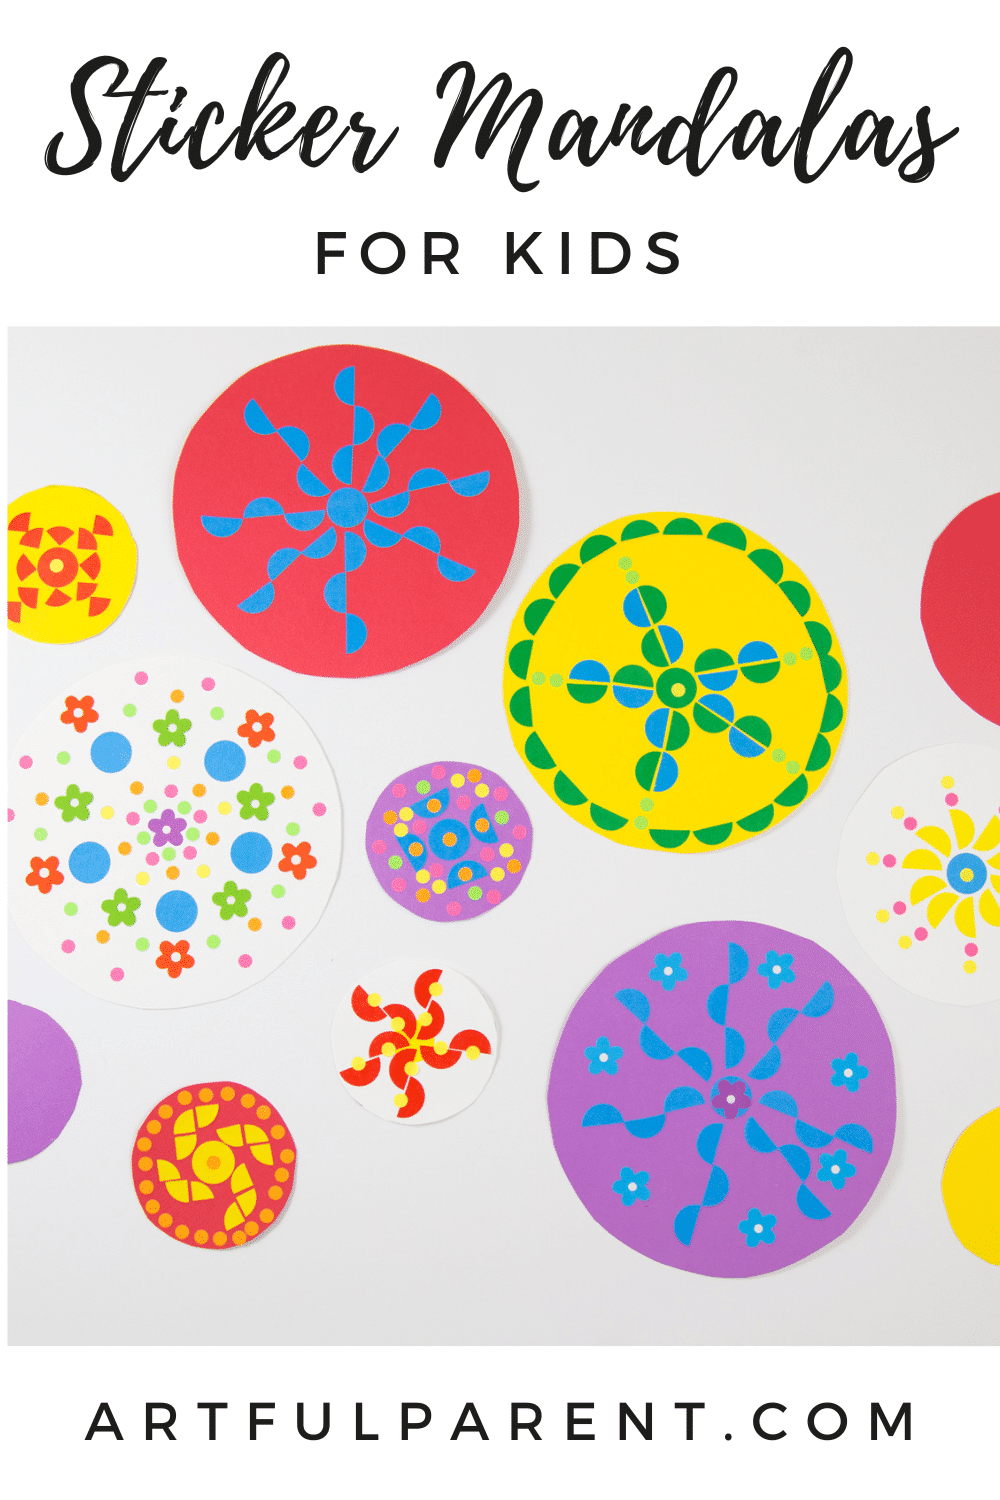 How to Make Easy Mandala Art with Stickers